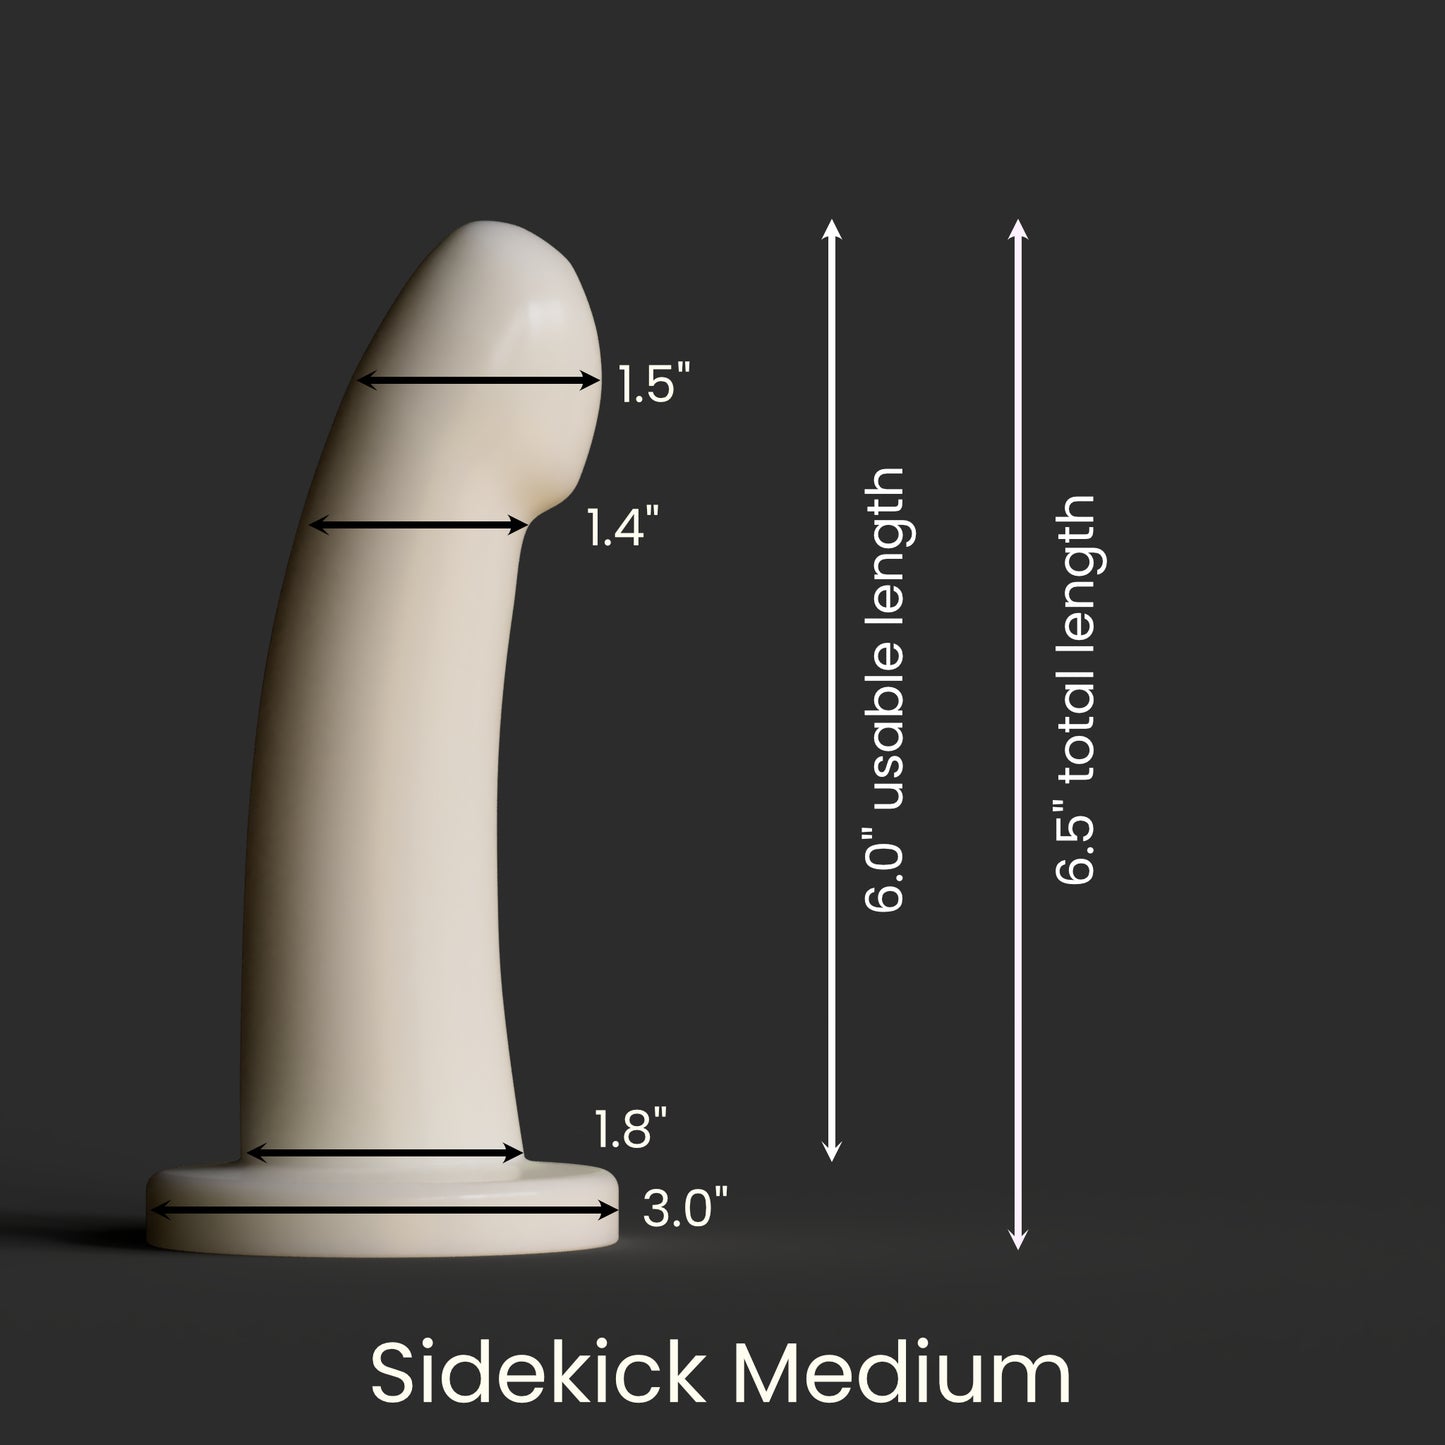 Diagram showing the dimensions of the Sidekick Medium as described in the product description.